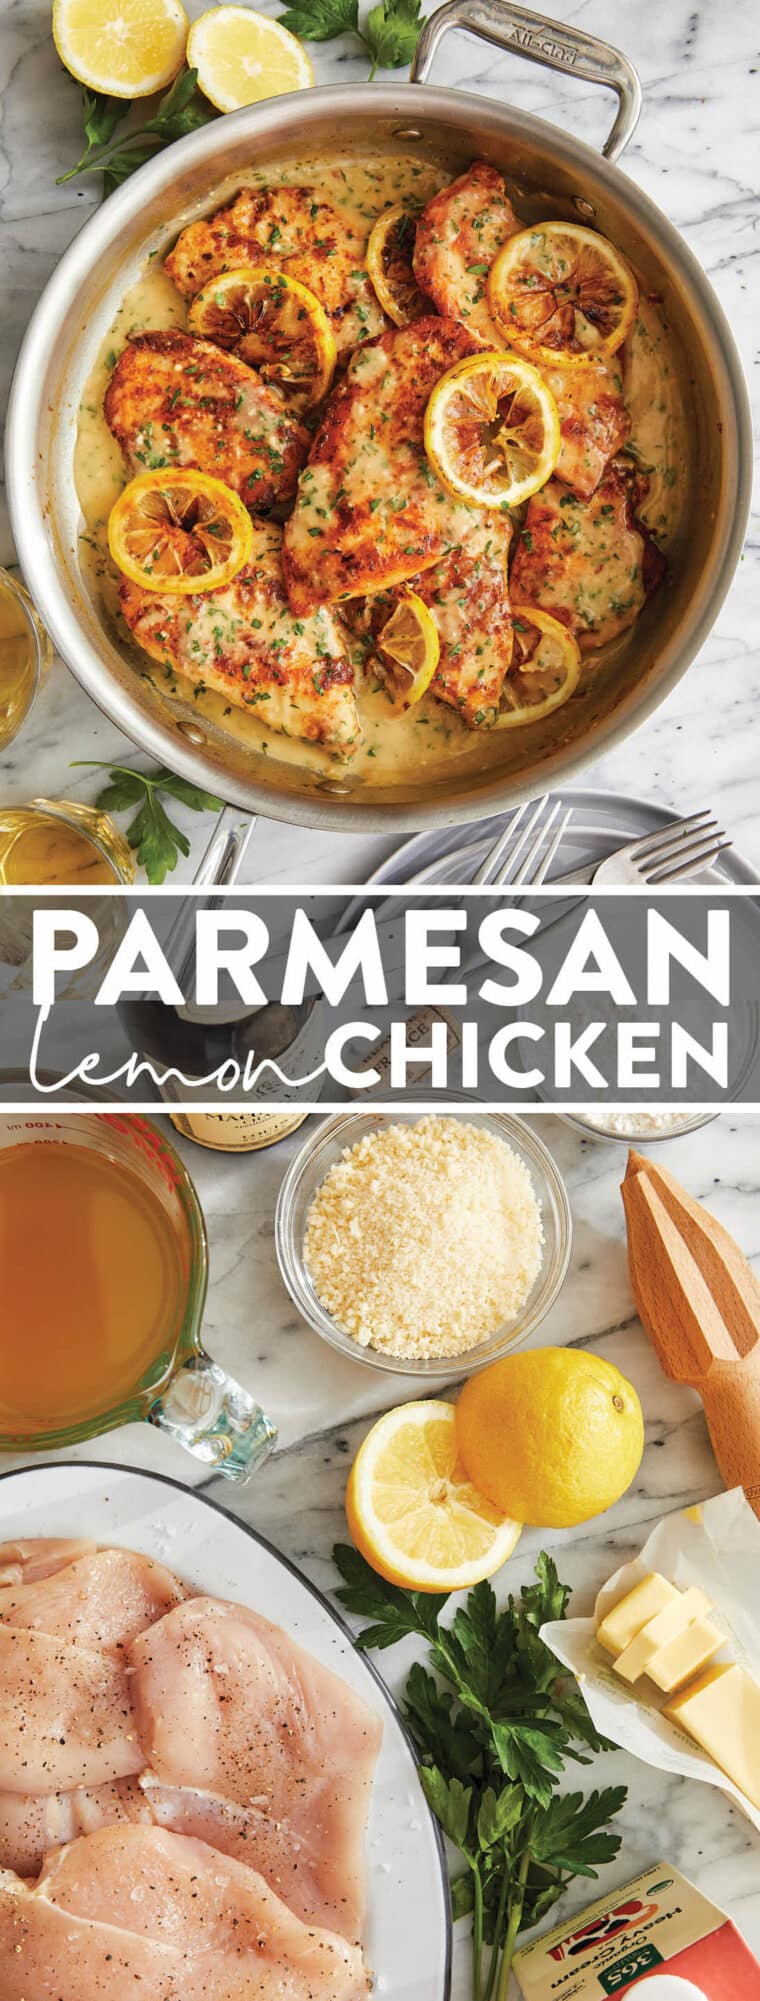 Parmesan Lemon Chicken - Golden brown, juicy, tender, parmesan-crusted chicken breasts in a creamy, lemon-garlicky sauce made in 30 minutes!